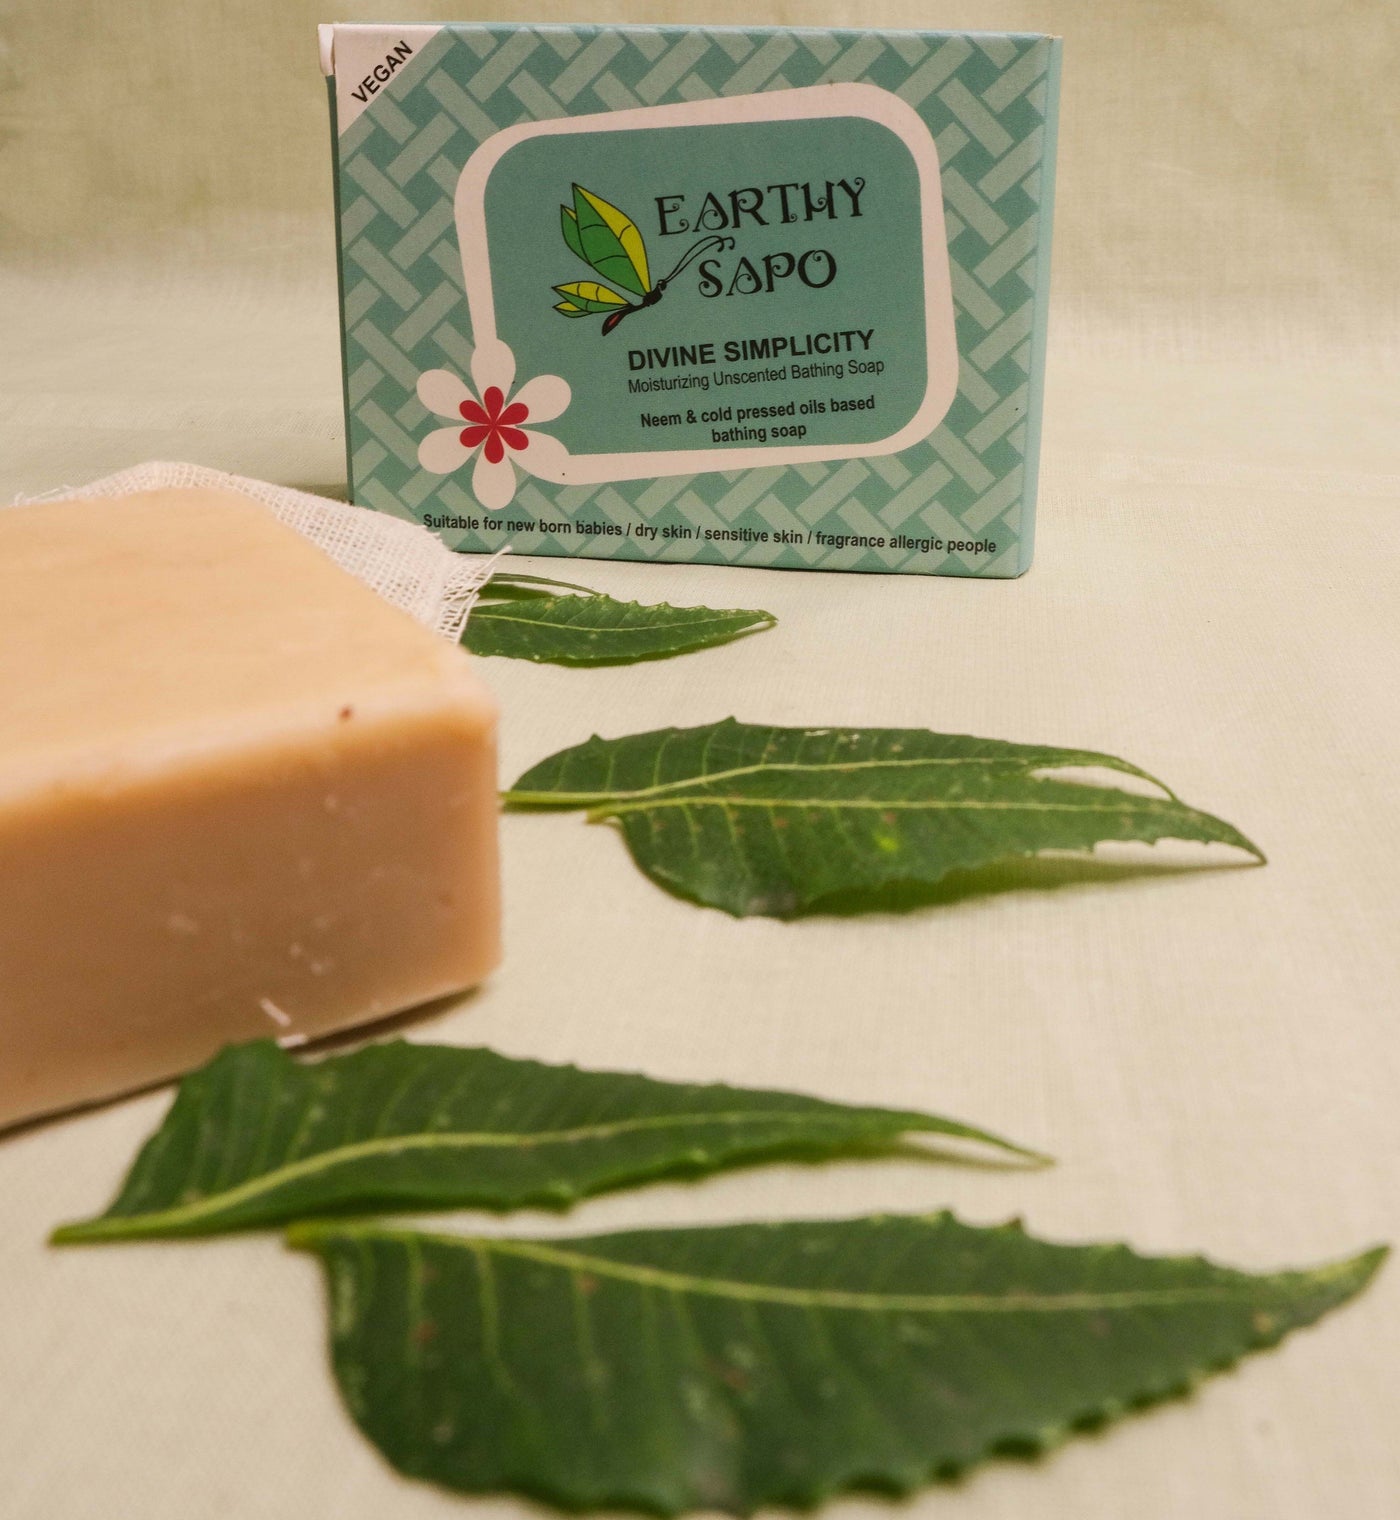 Divine Simplicity Moisturizing Unscented Bathing Soap - Earthy Sapo